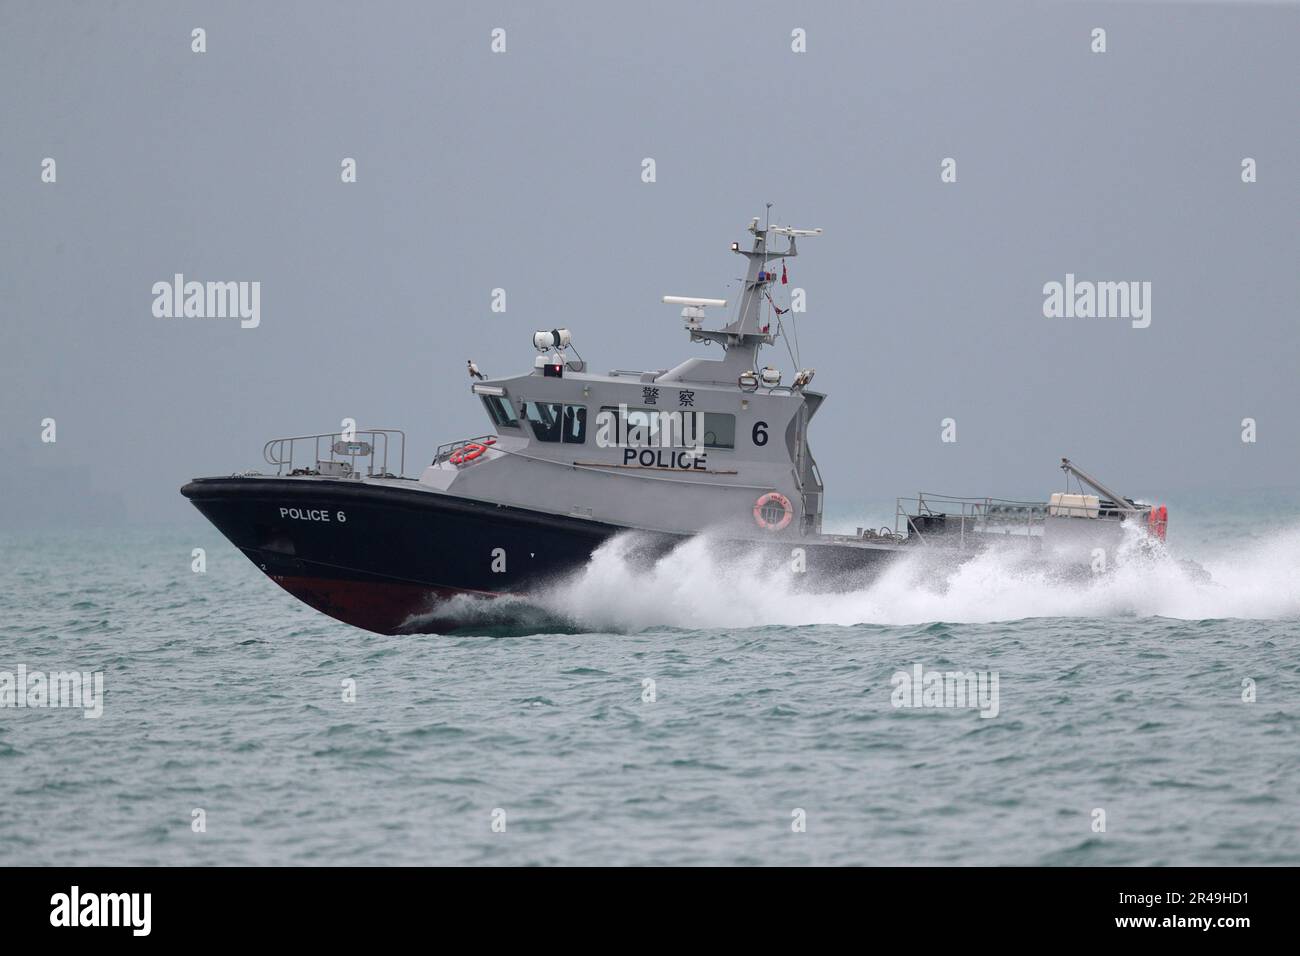 Police Launch 6, side view at speed, Tolo Harbour, Hong Kong Stock Photo